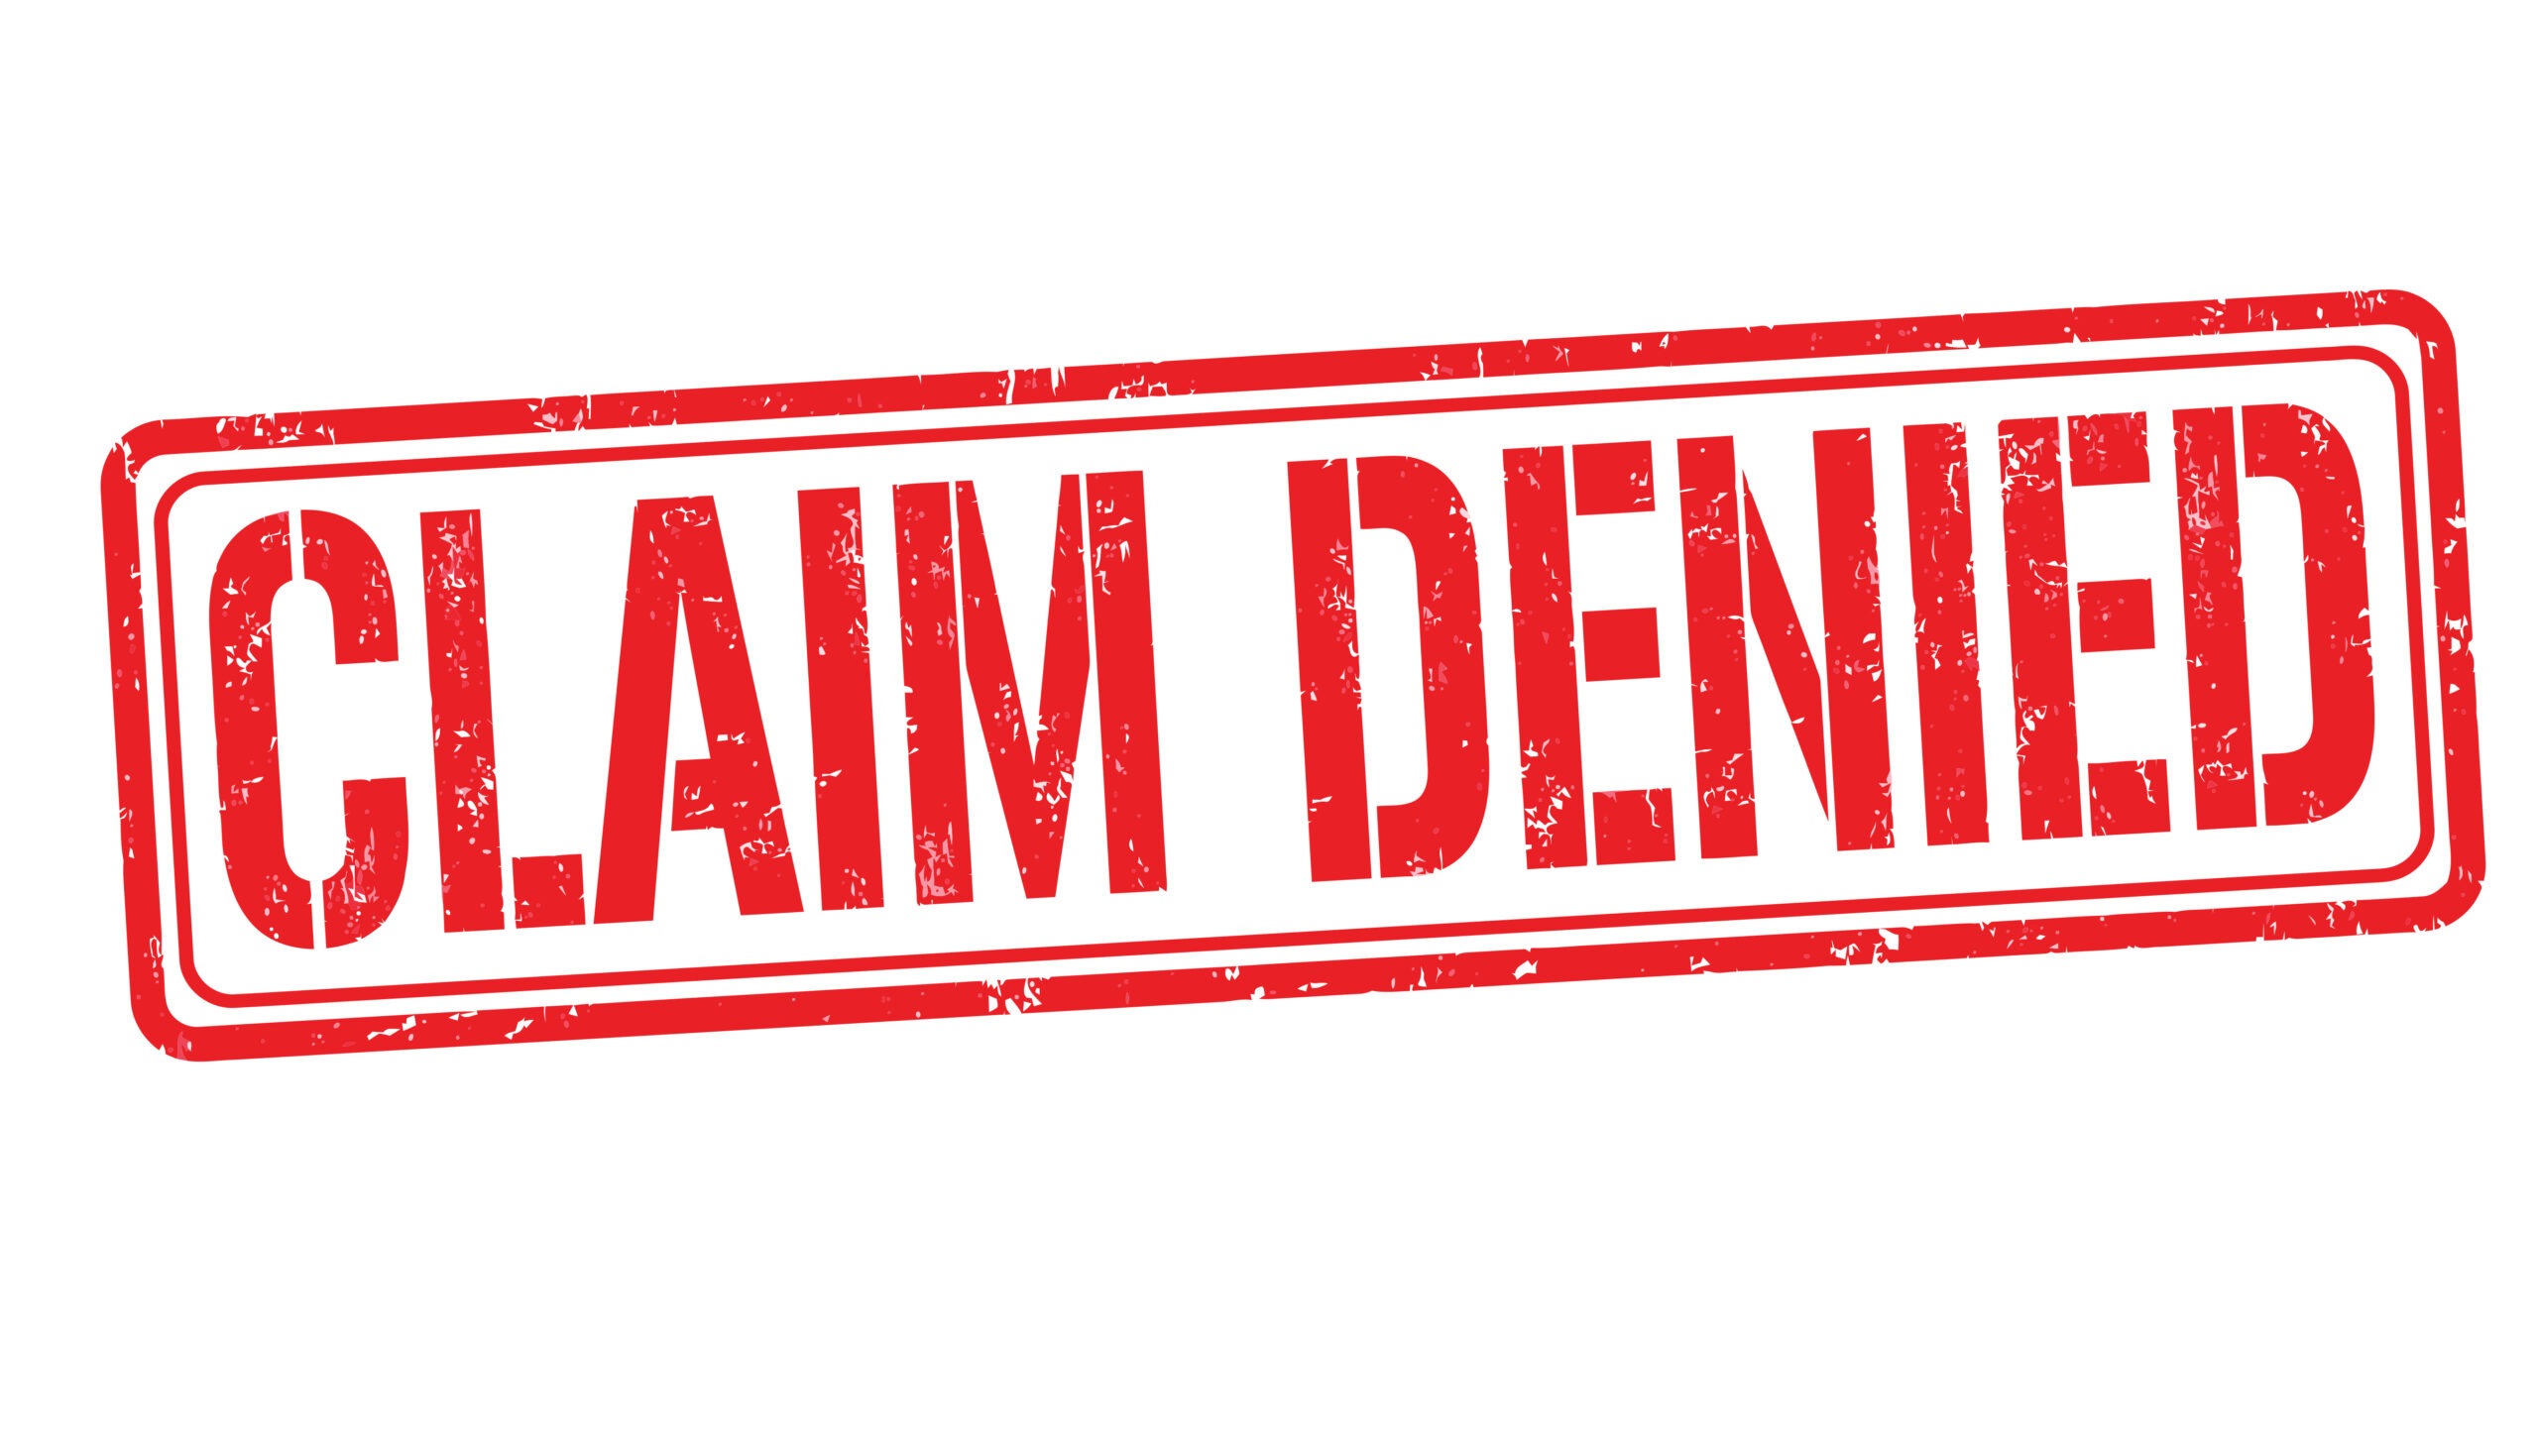 What if My Accident Claim Was Denied by State Farm?